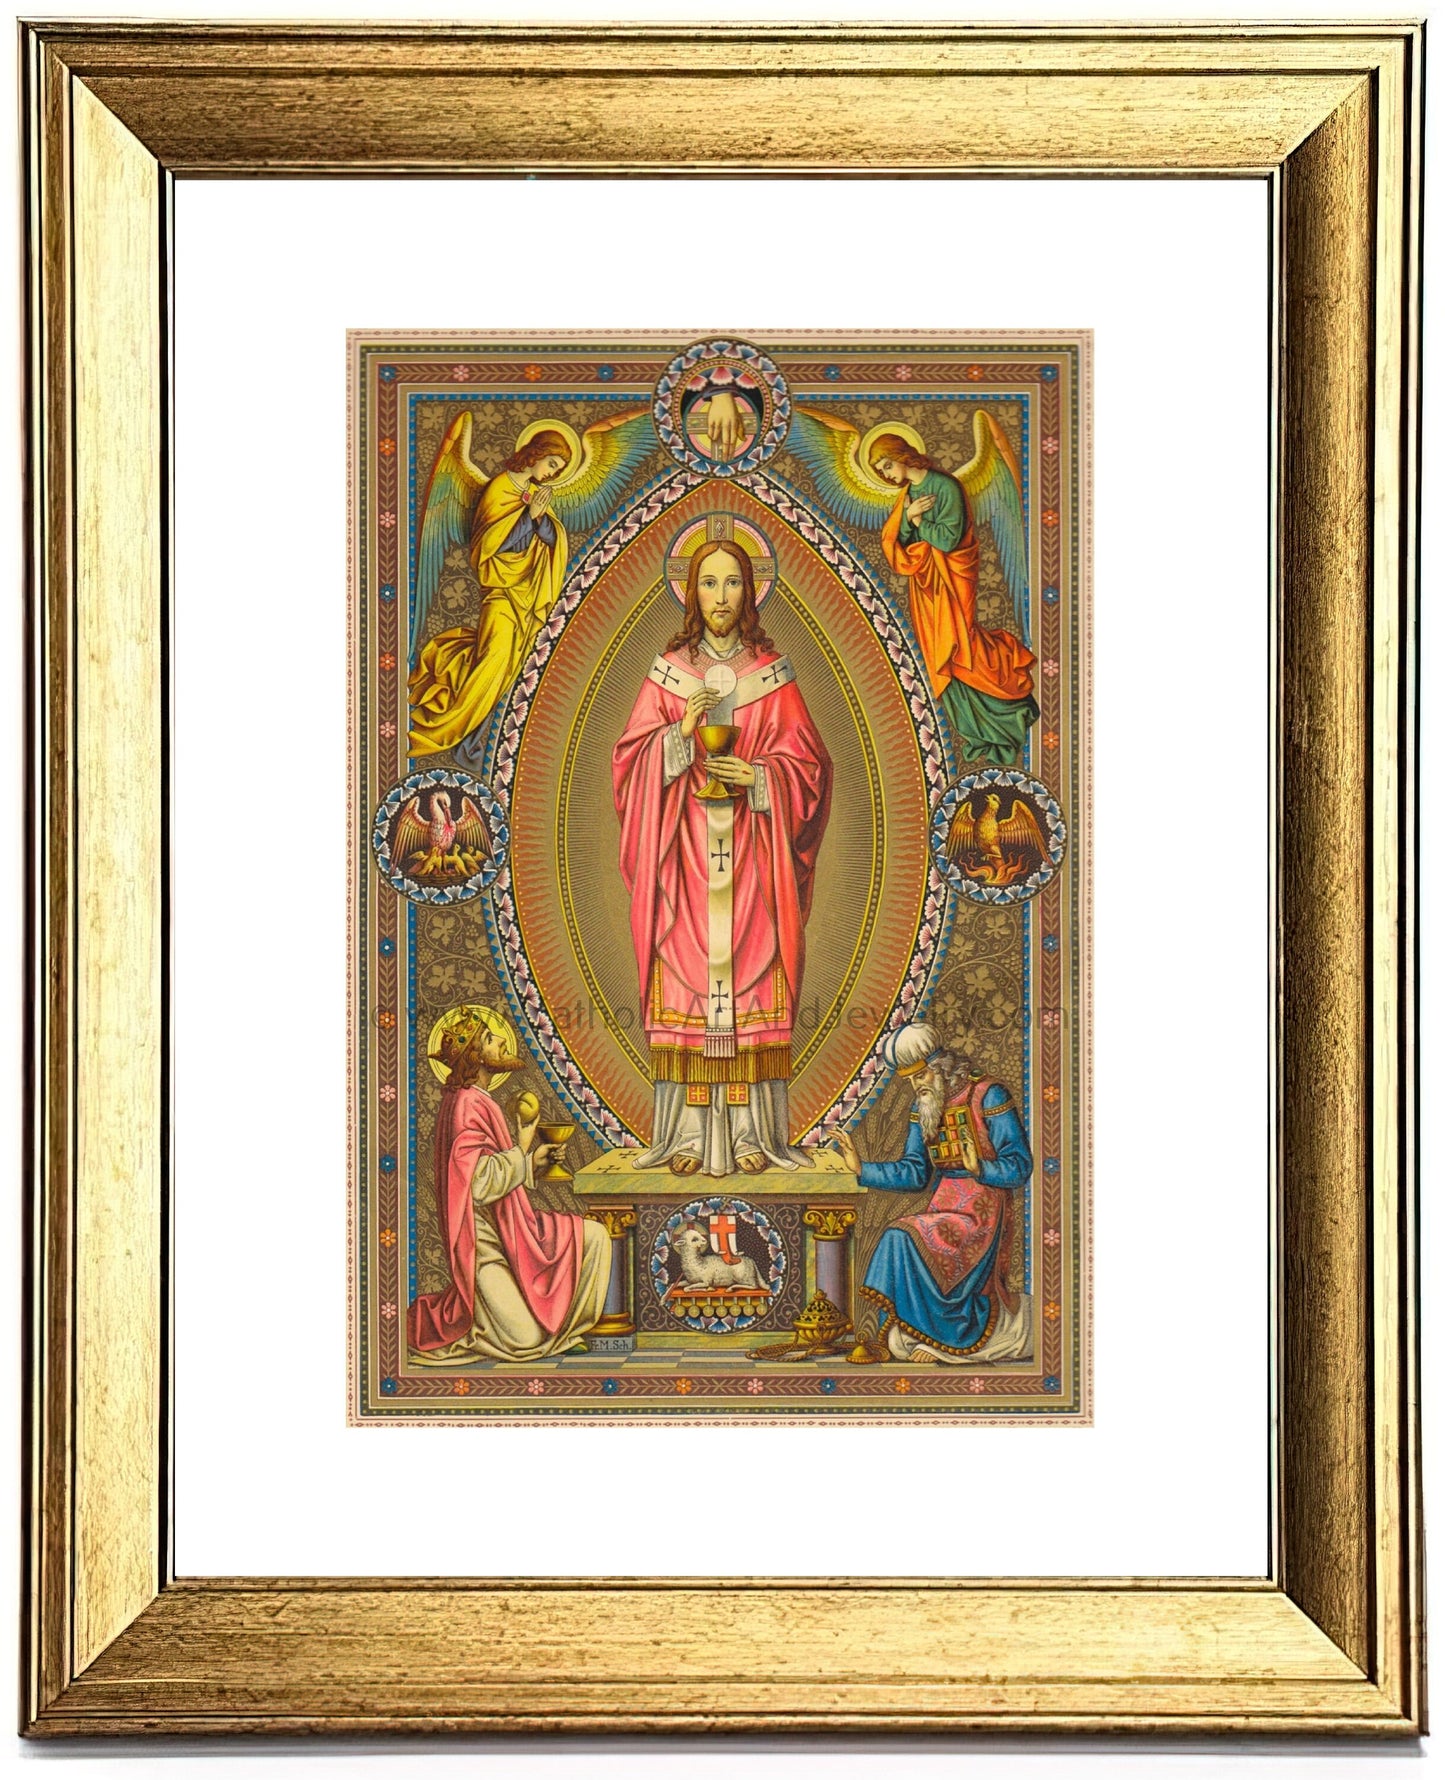 Christ the High Priest by Max Schmalzl, from a Roman Missal – Catholic Art Print – Archival Quality